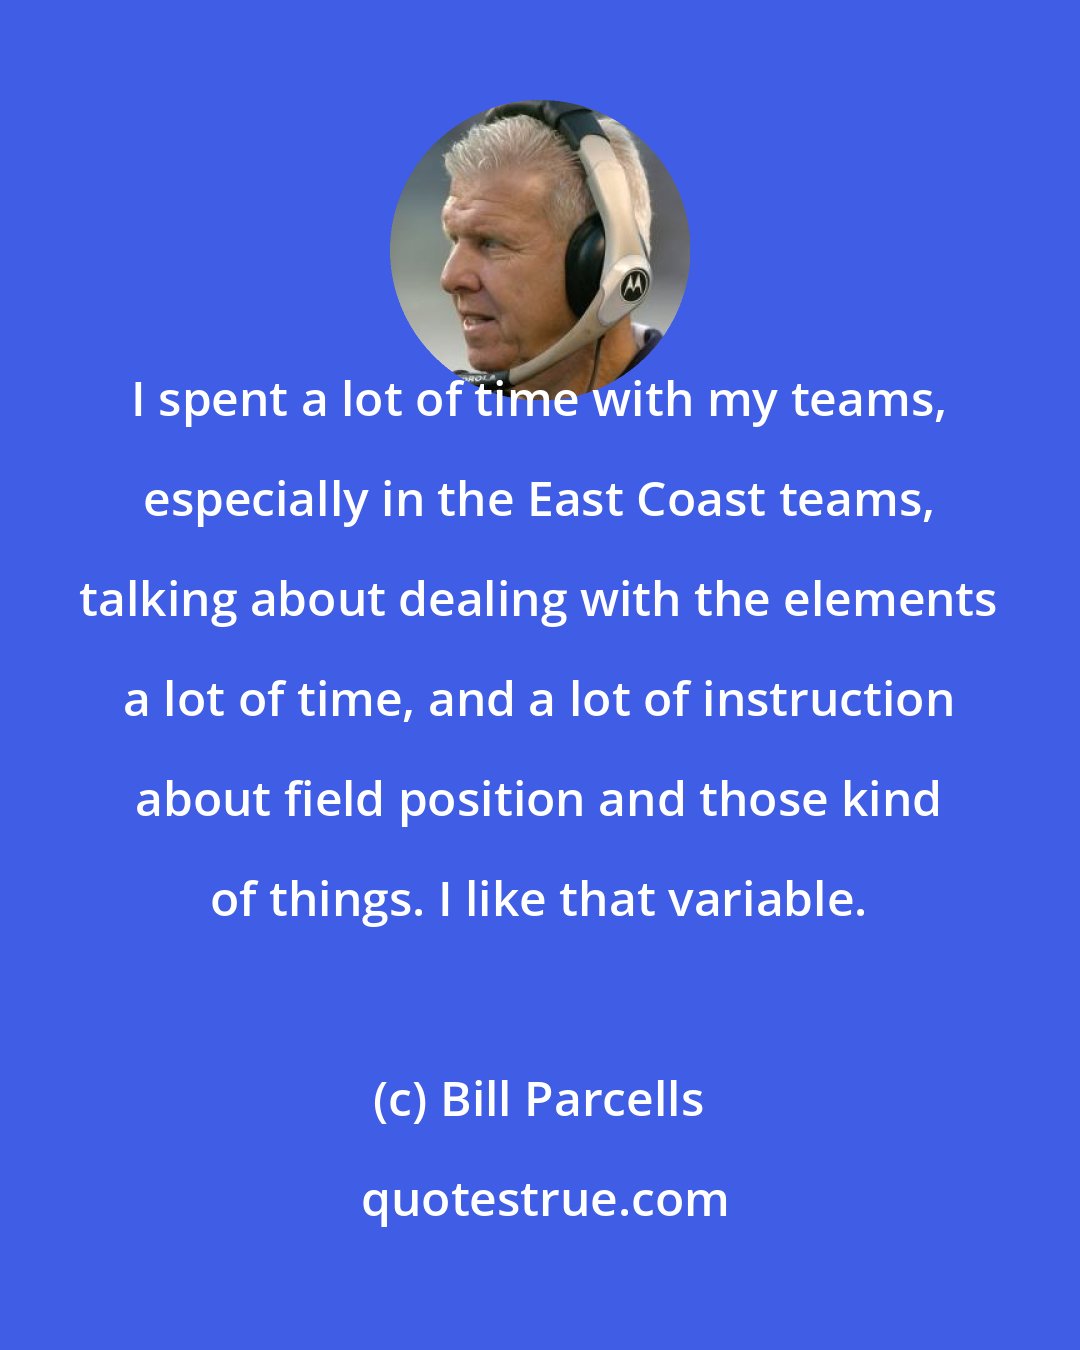 Bill Parcells: I spent a lot of time with my teams, especially in the East Coast teams, talking about dealing with the elements a lot of time, and a lot of instruction about field position and those kind of things. I like that variable.